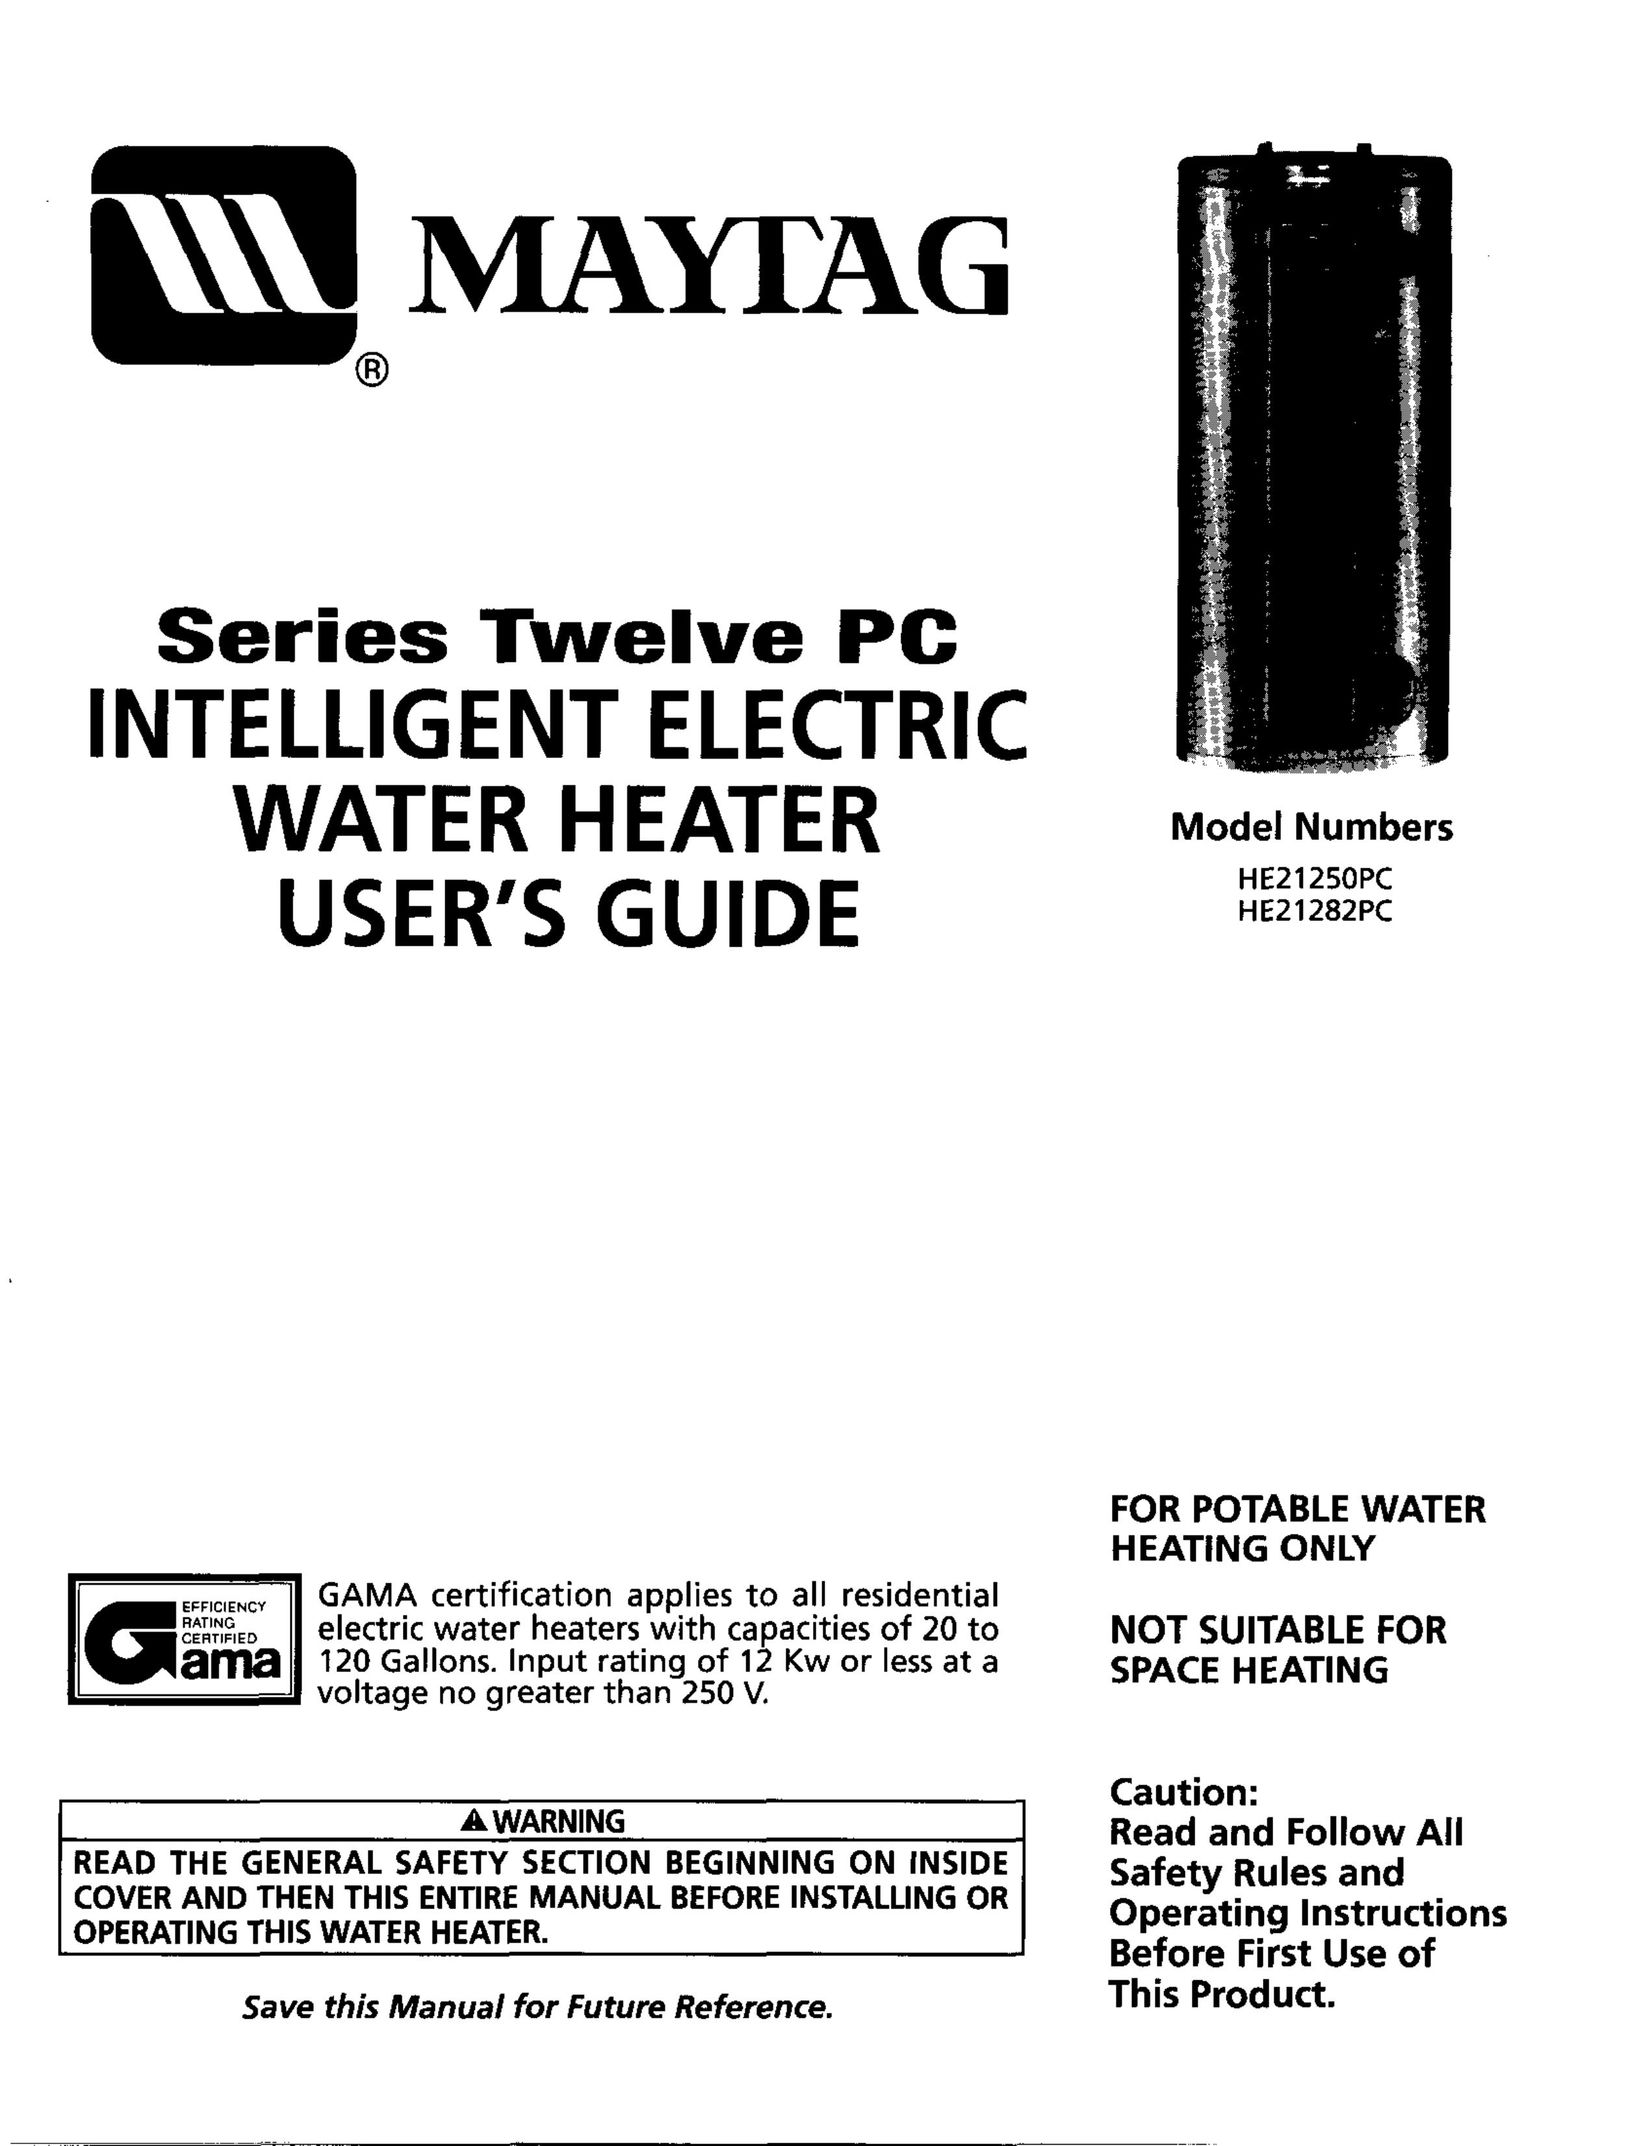 Maytag HE21250PC Water Heater User Manual